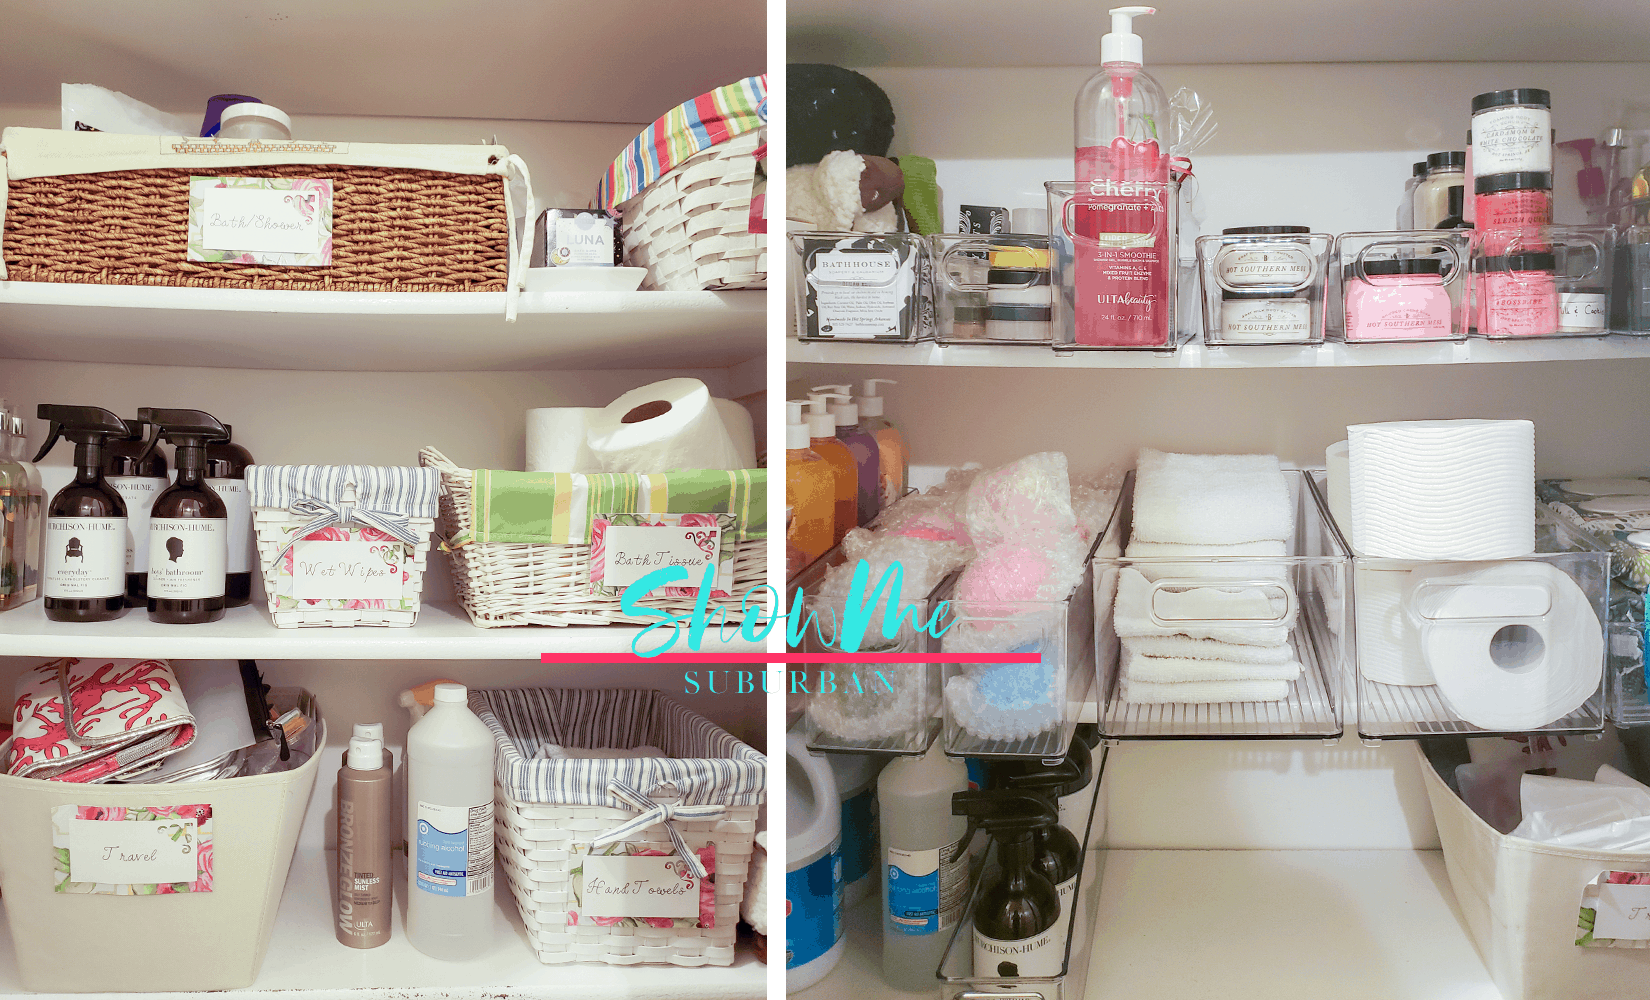 Before and after photos of linen closet organized with baskets versus clear bins